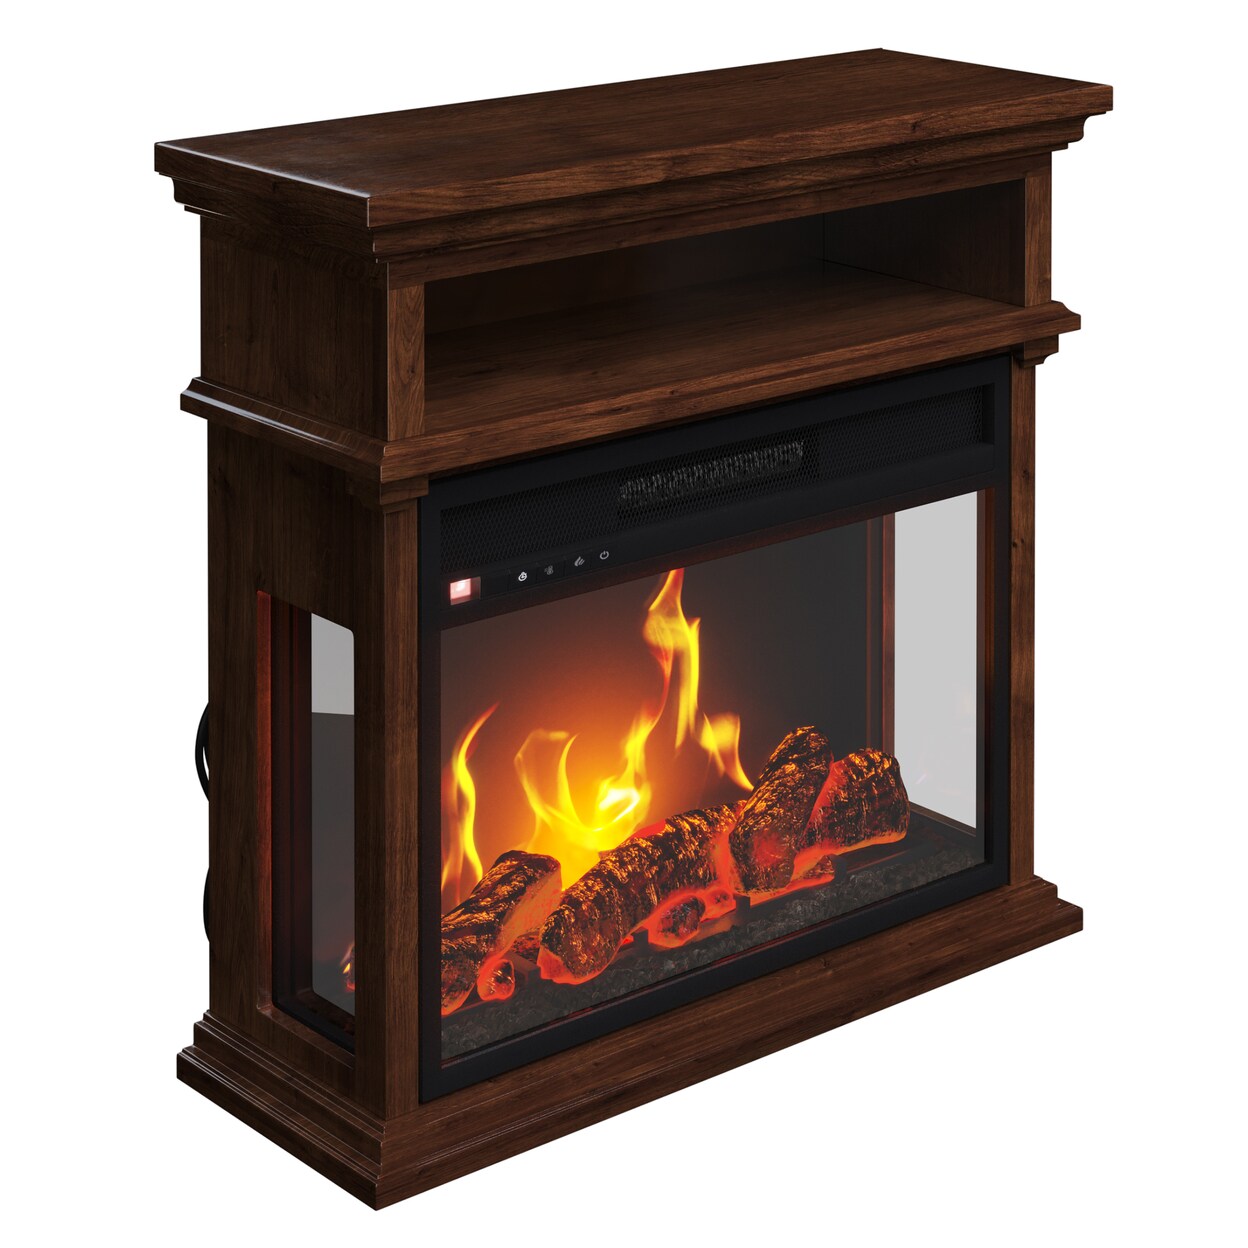 Northwest Electric Fireplace 3-Sided Heater with Mantel Shelf Remote LED Flames Faux Logs